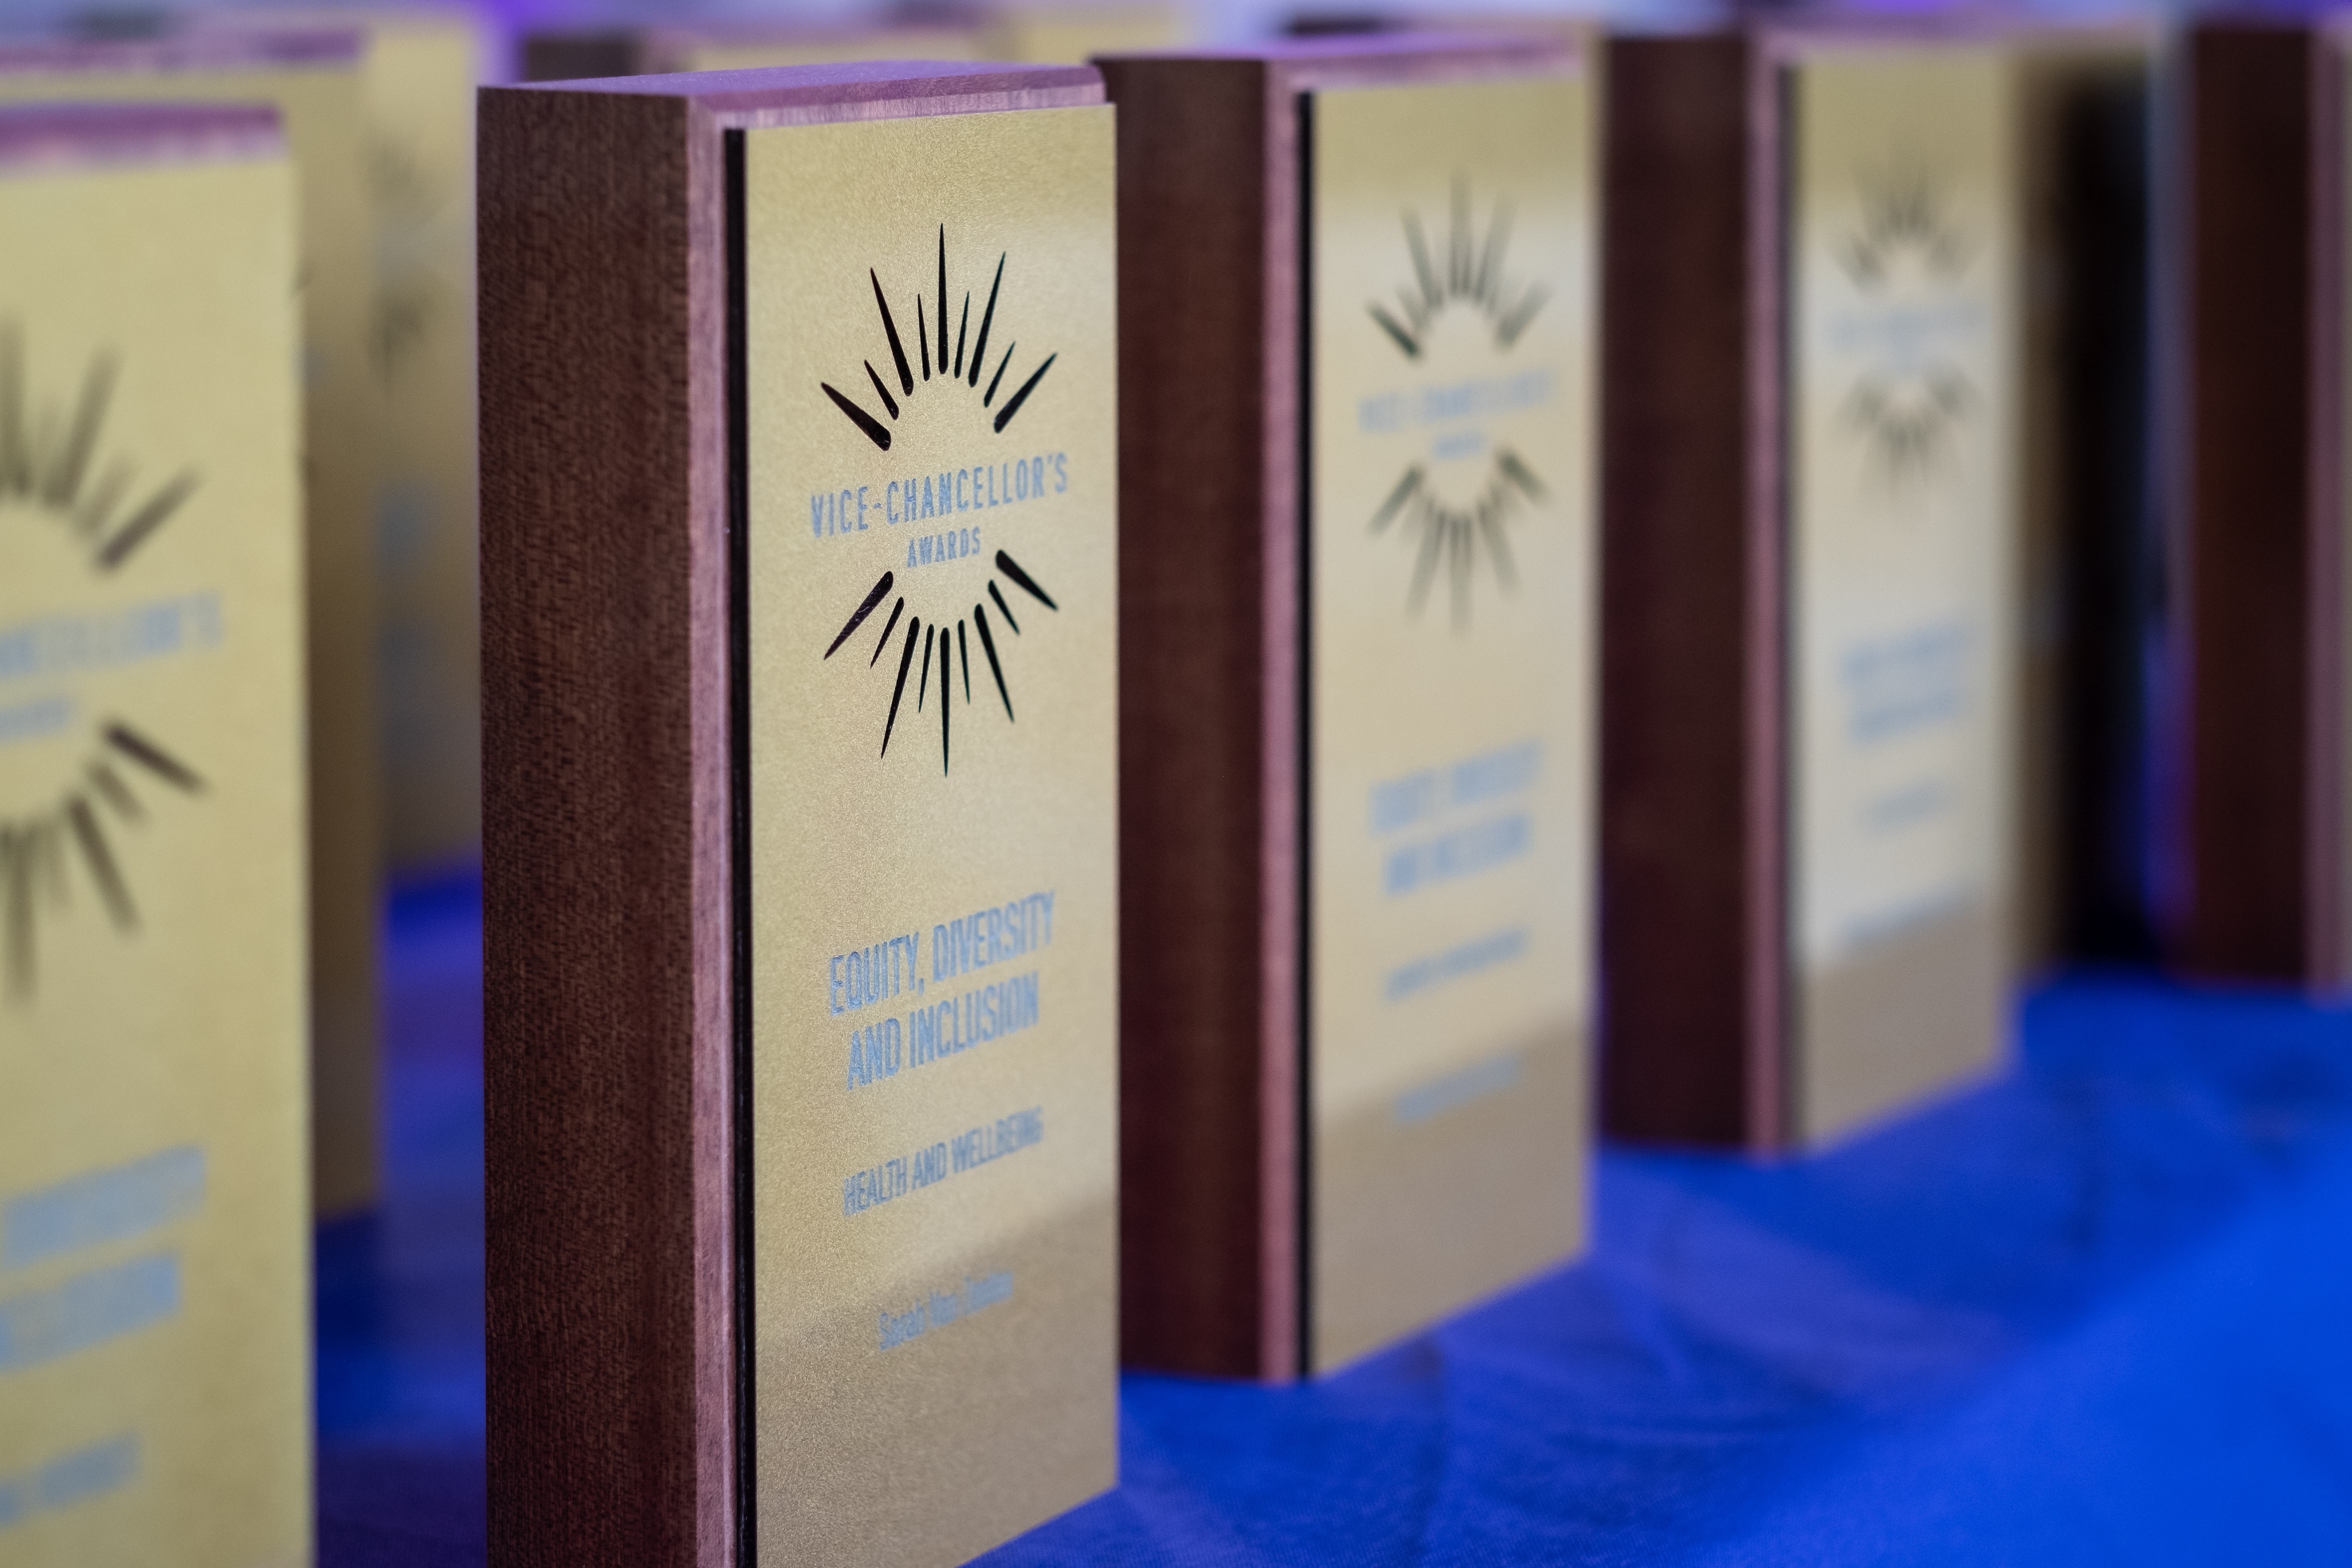 Photo of the awards - wooden blocks with gold plagues